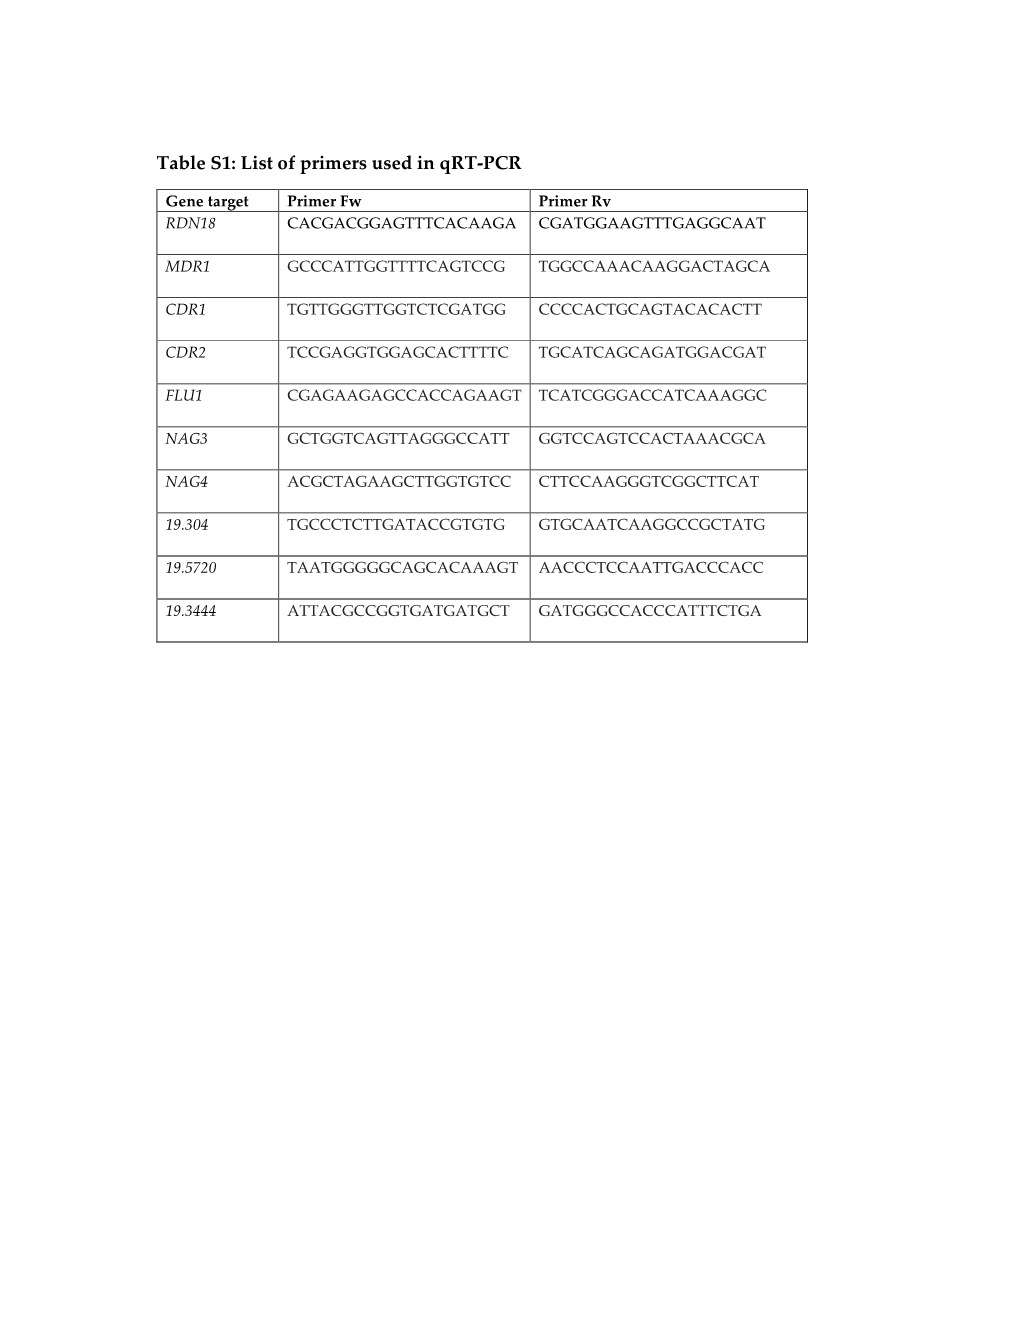 List of Primers Used in Qrt-PCR